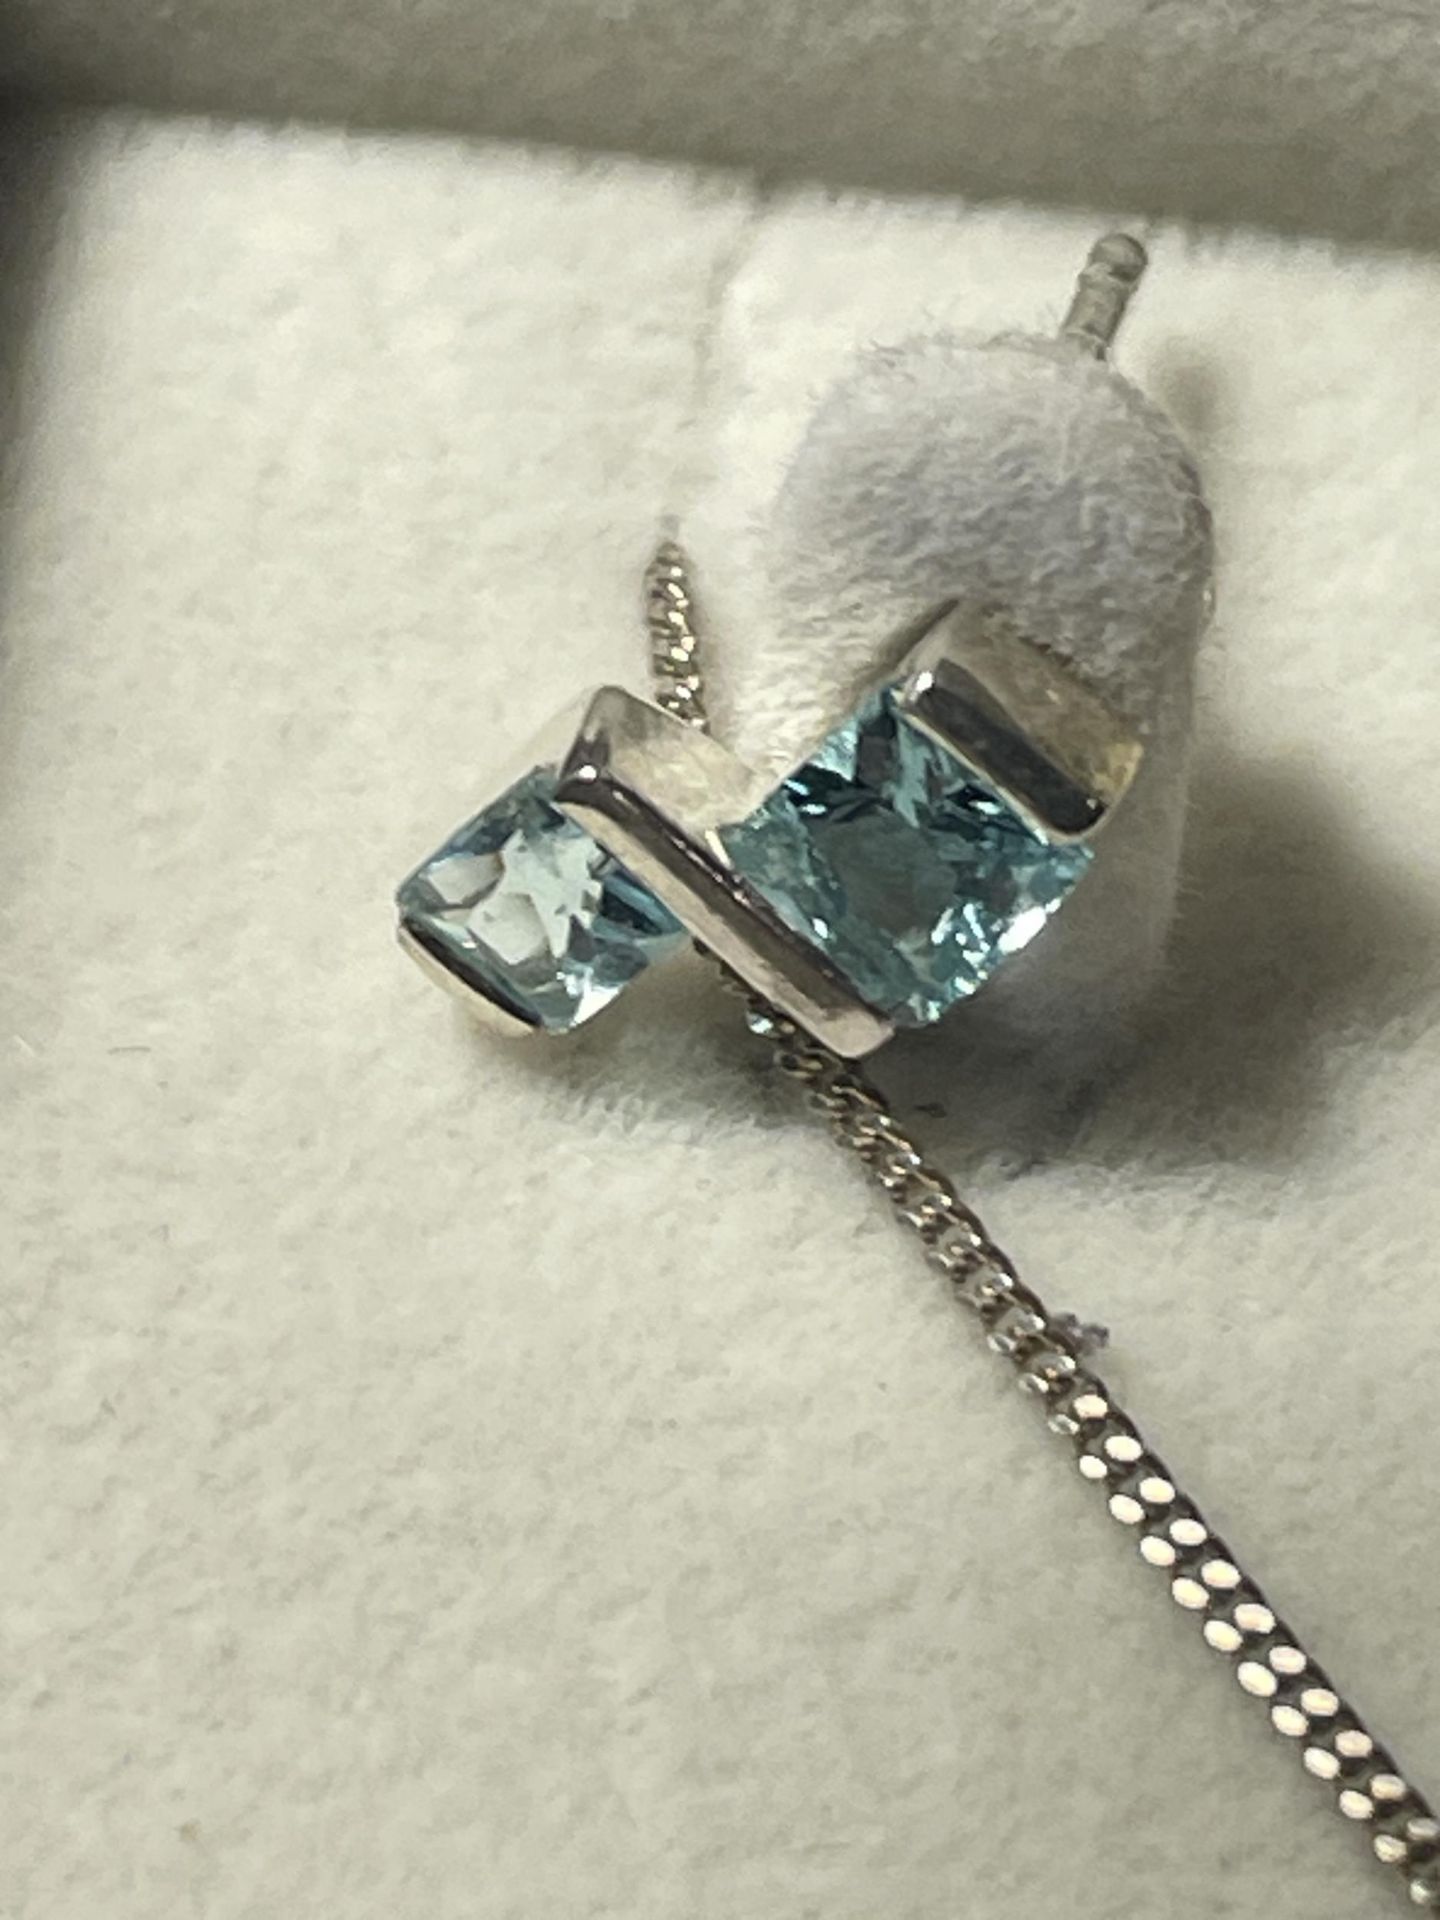 A SILVER NECKLACE AND EARRING SET WITH AQUAMARINE COLOURED STONES IN A PRESENTATION BOX - Image 4 of 4